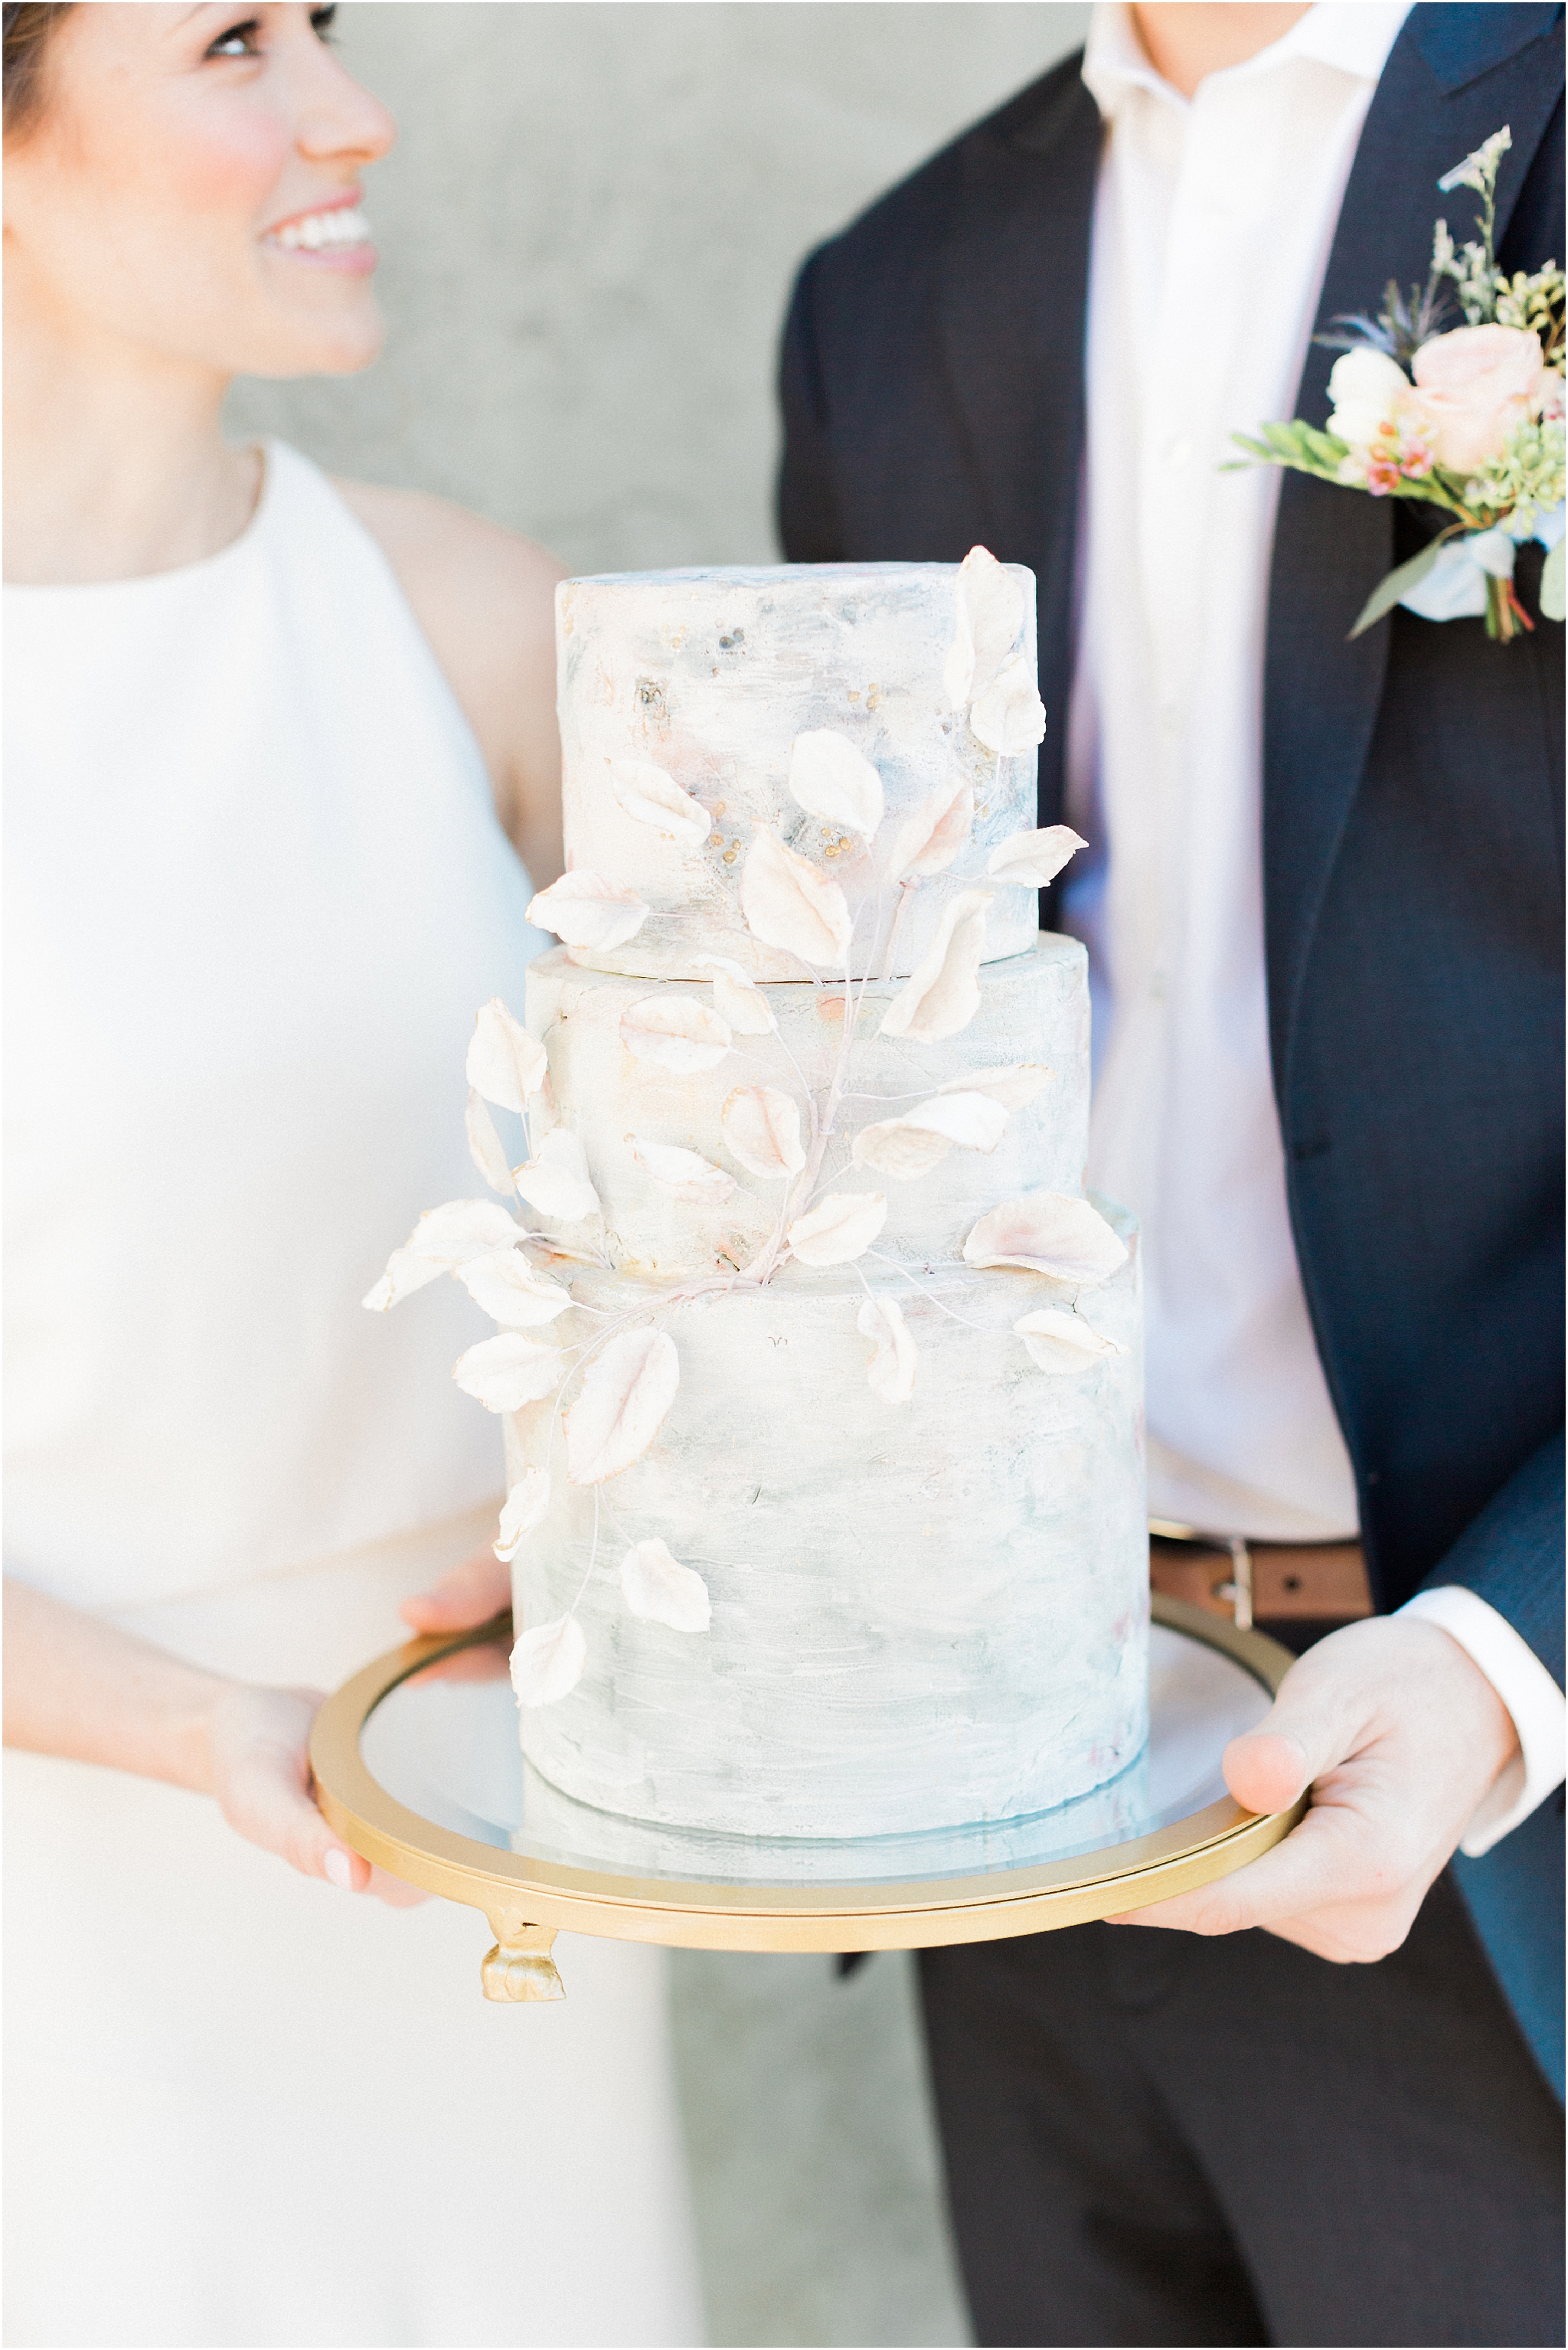 Tessa Pinner textured cake with blue and pink accents